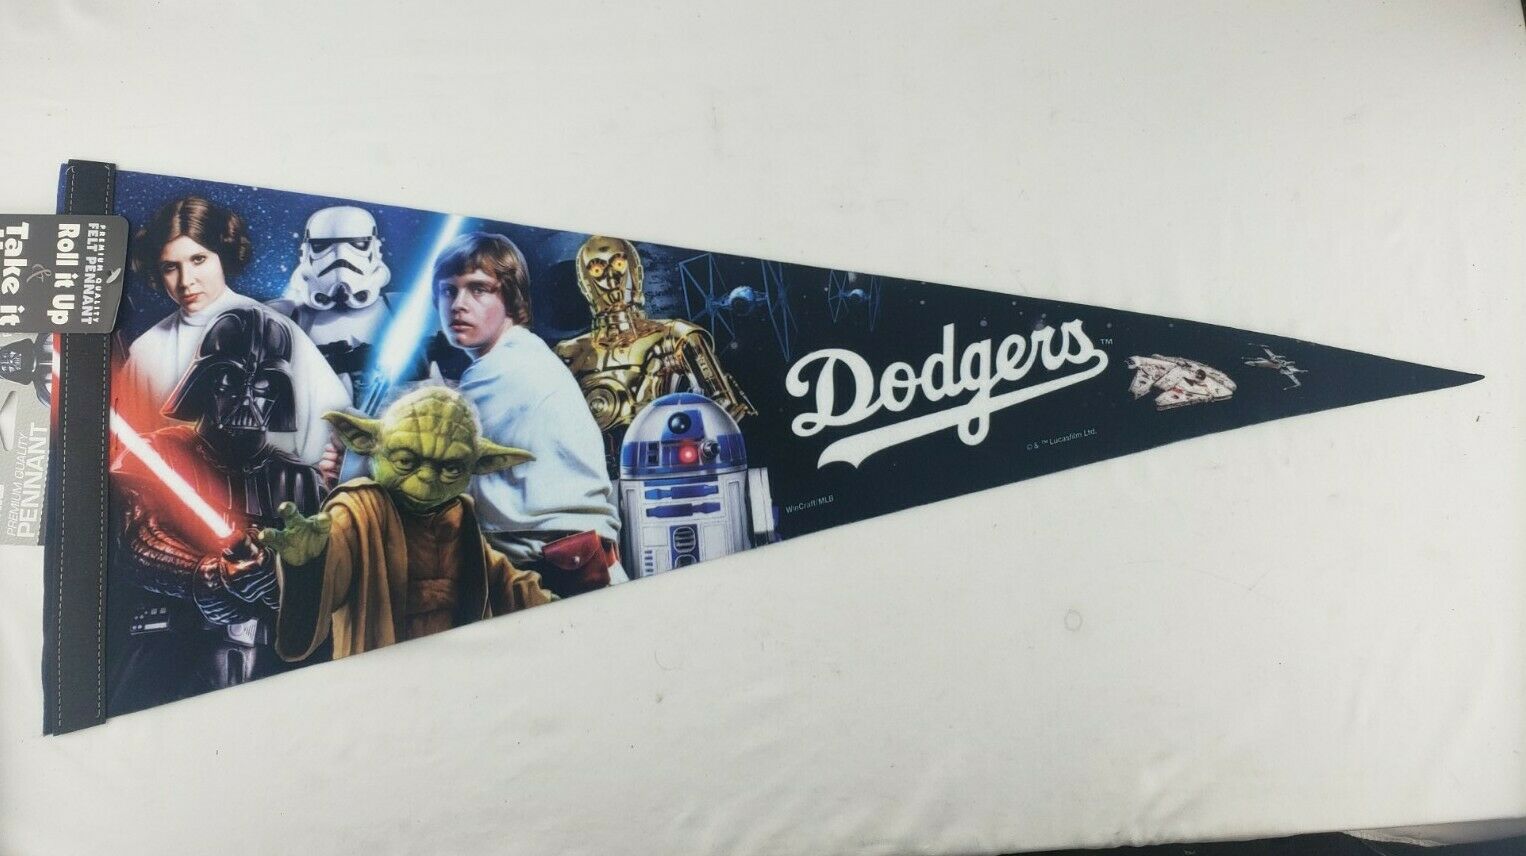 The Official Star Wars Pennant of The Baseball World Series Champion LA Dodgers